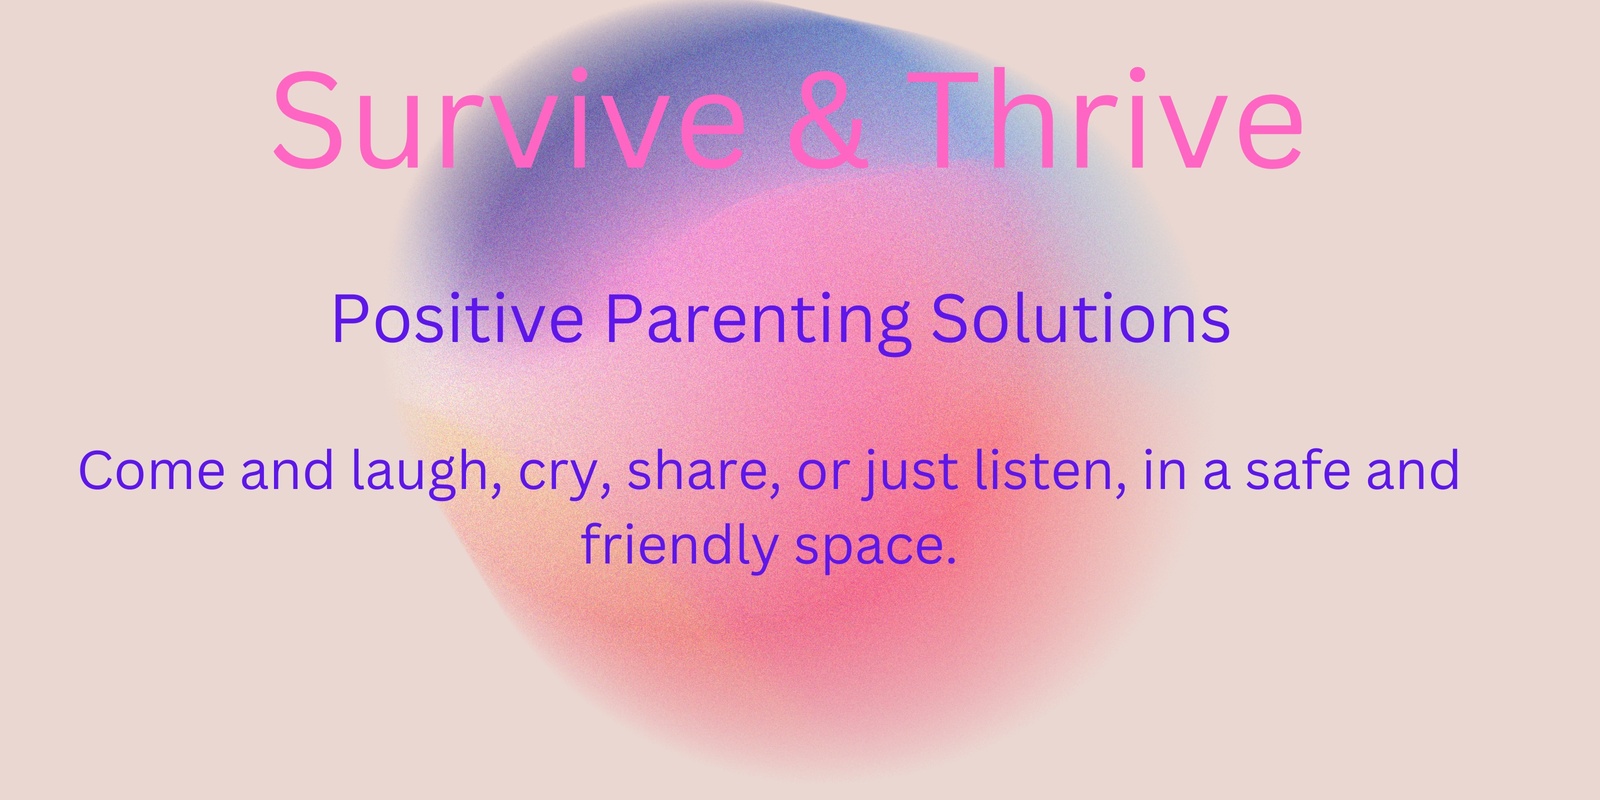 Banner image for Survive and Thrive - positive parenting solutions.